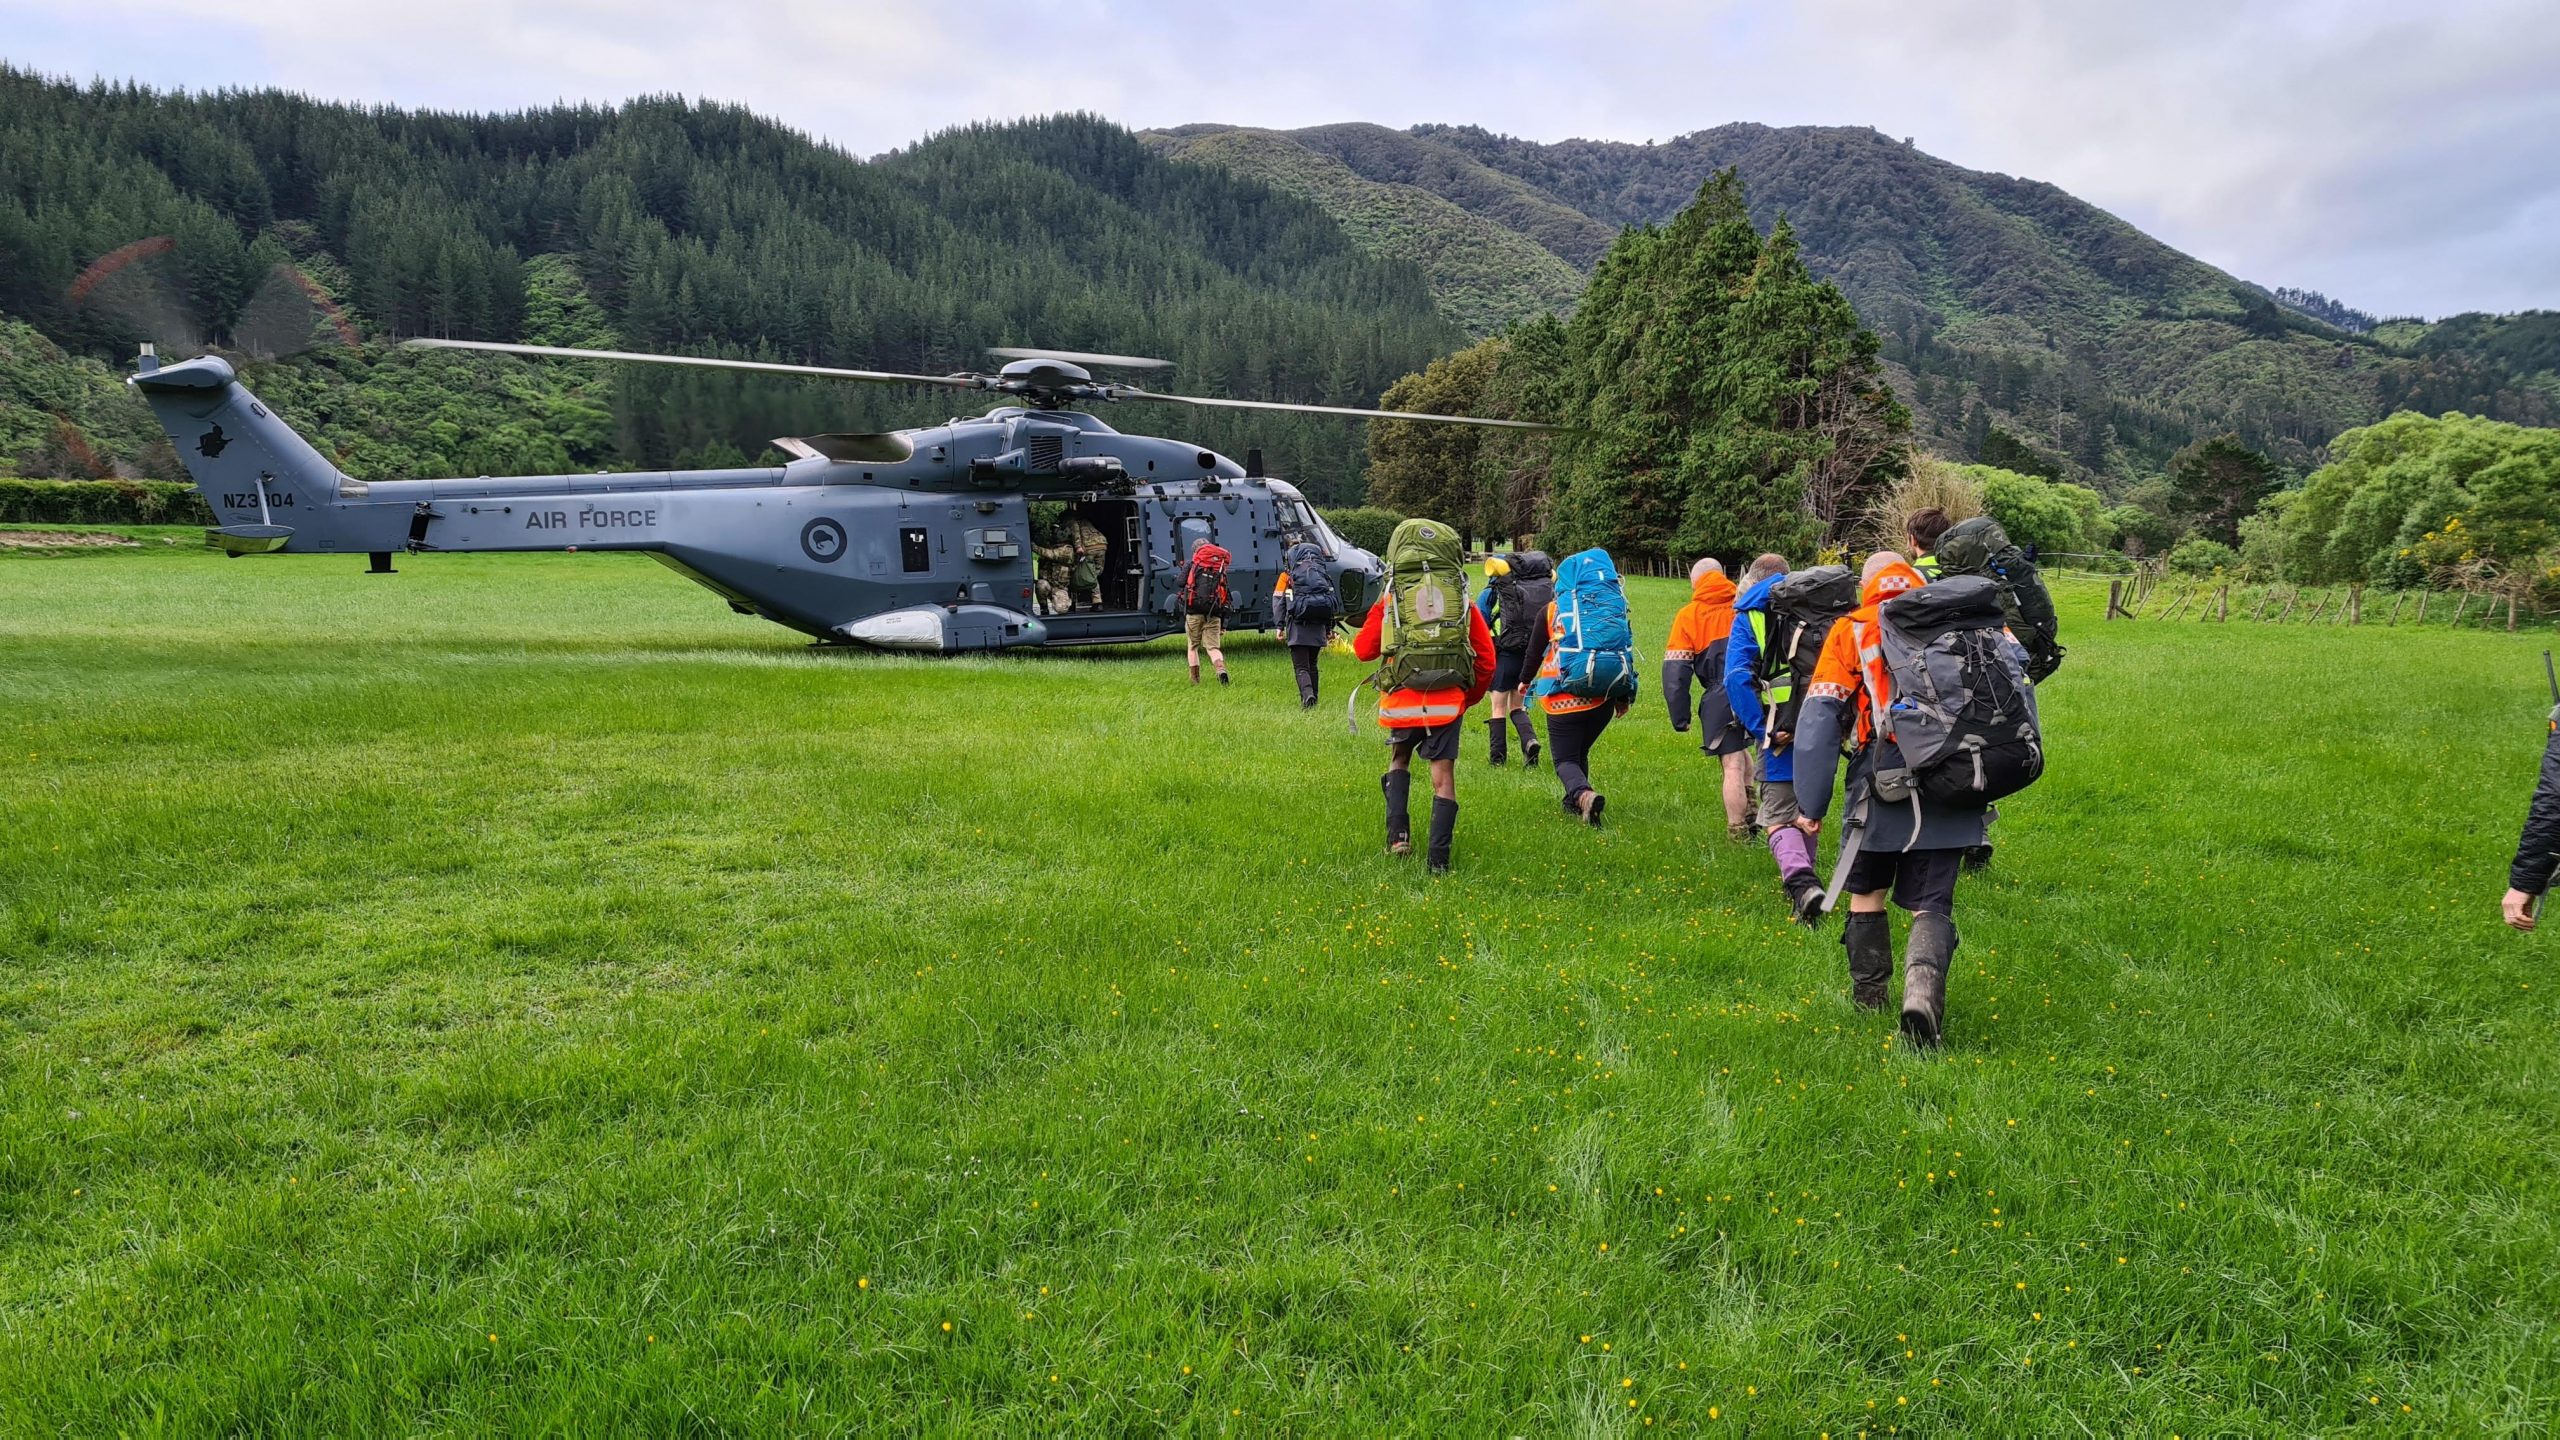 Wellington Land Search and Rescue Members with packs and equipment walking towards an NH90 helicopter that has landed in a large green field.